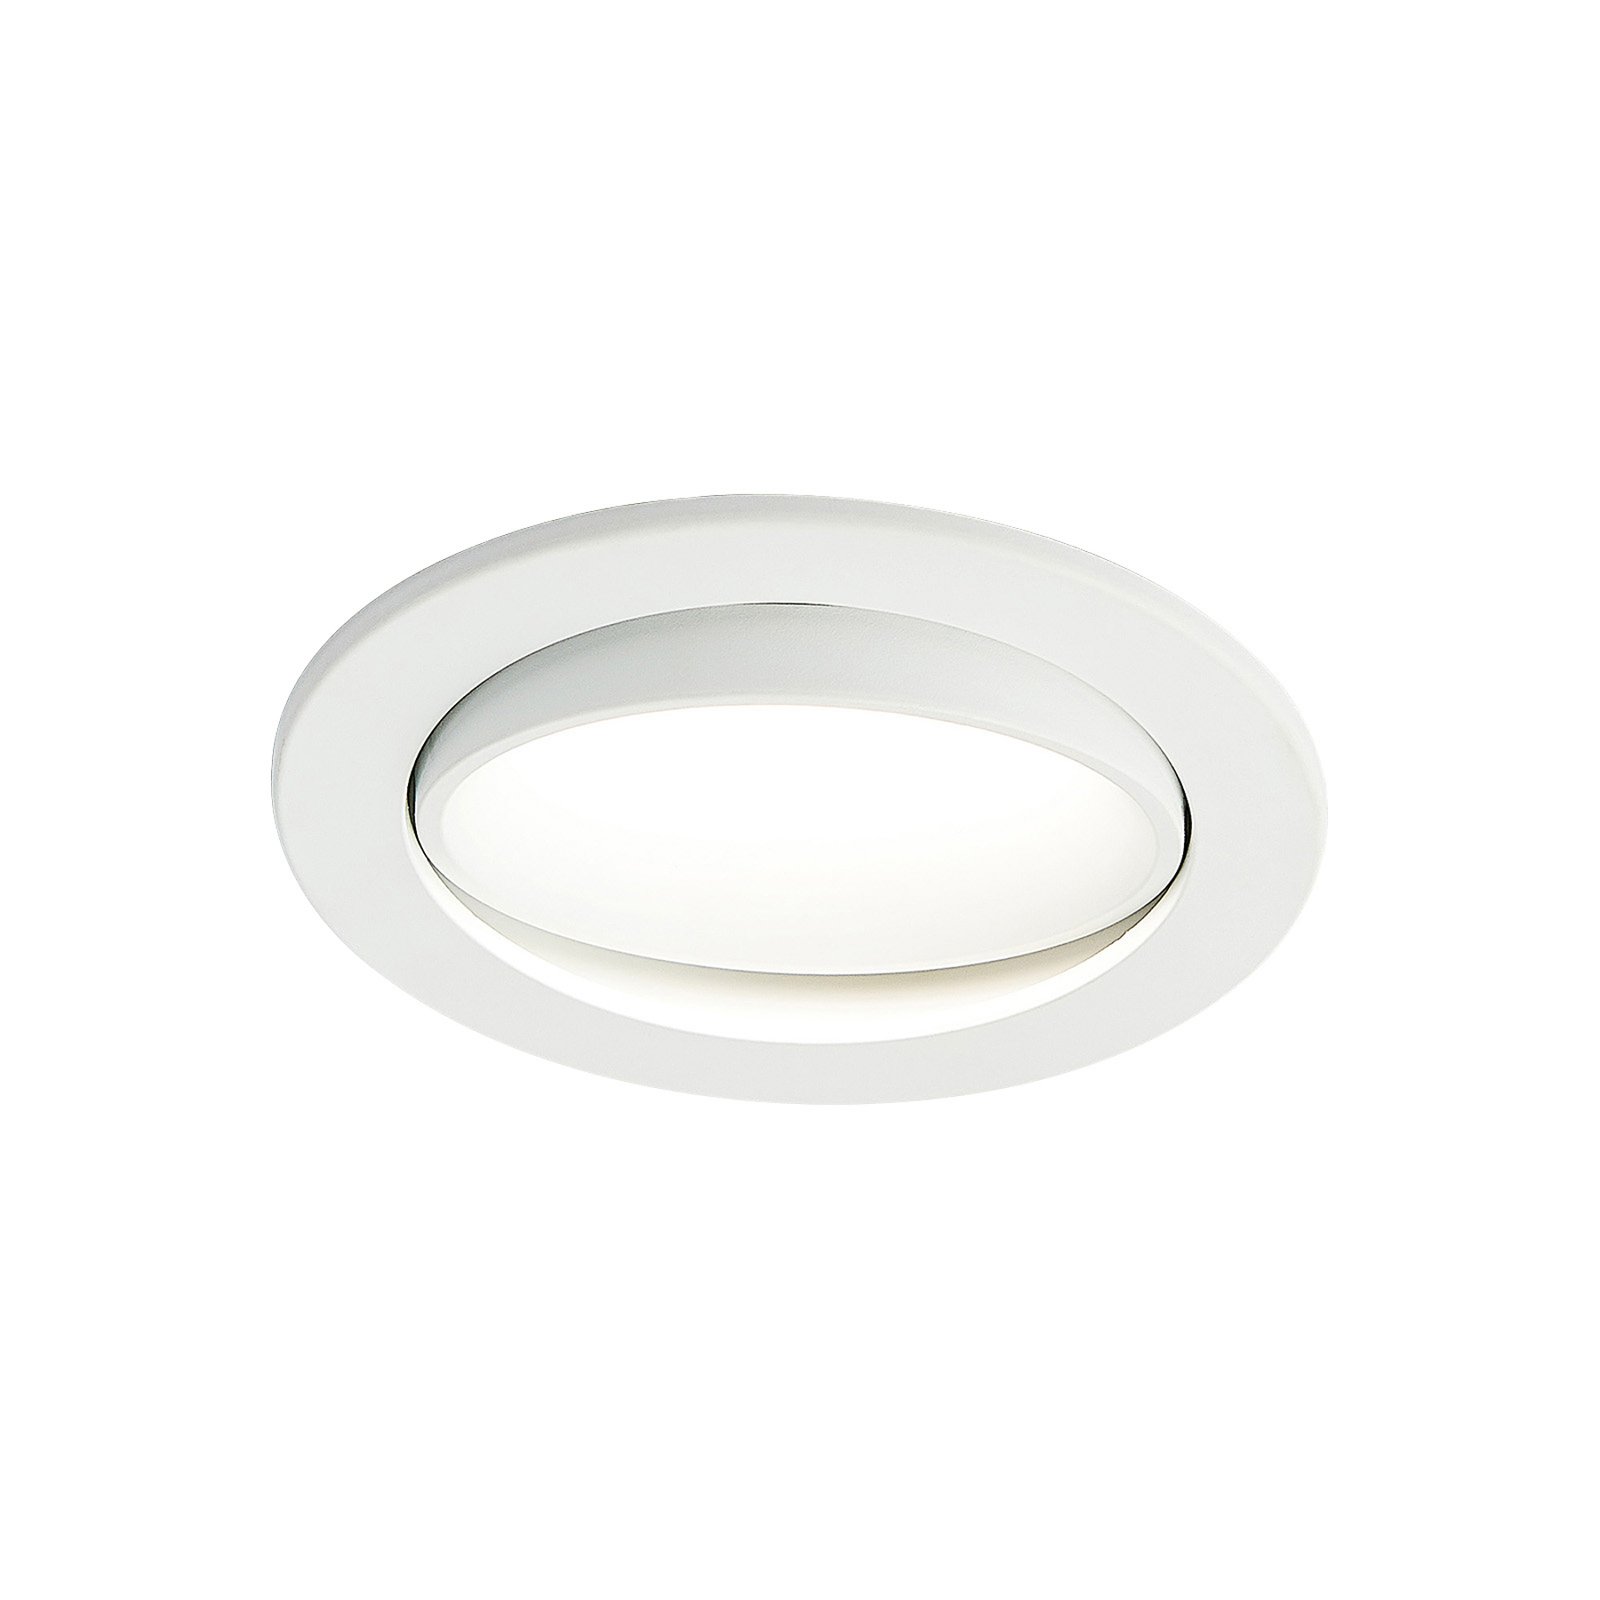 Arcchio LED recessed light Katerin, white, swivelling, set of 2